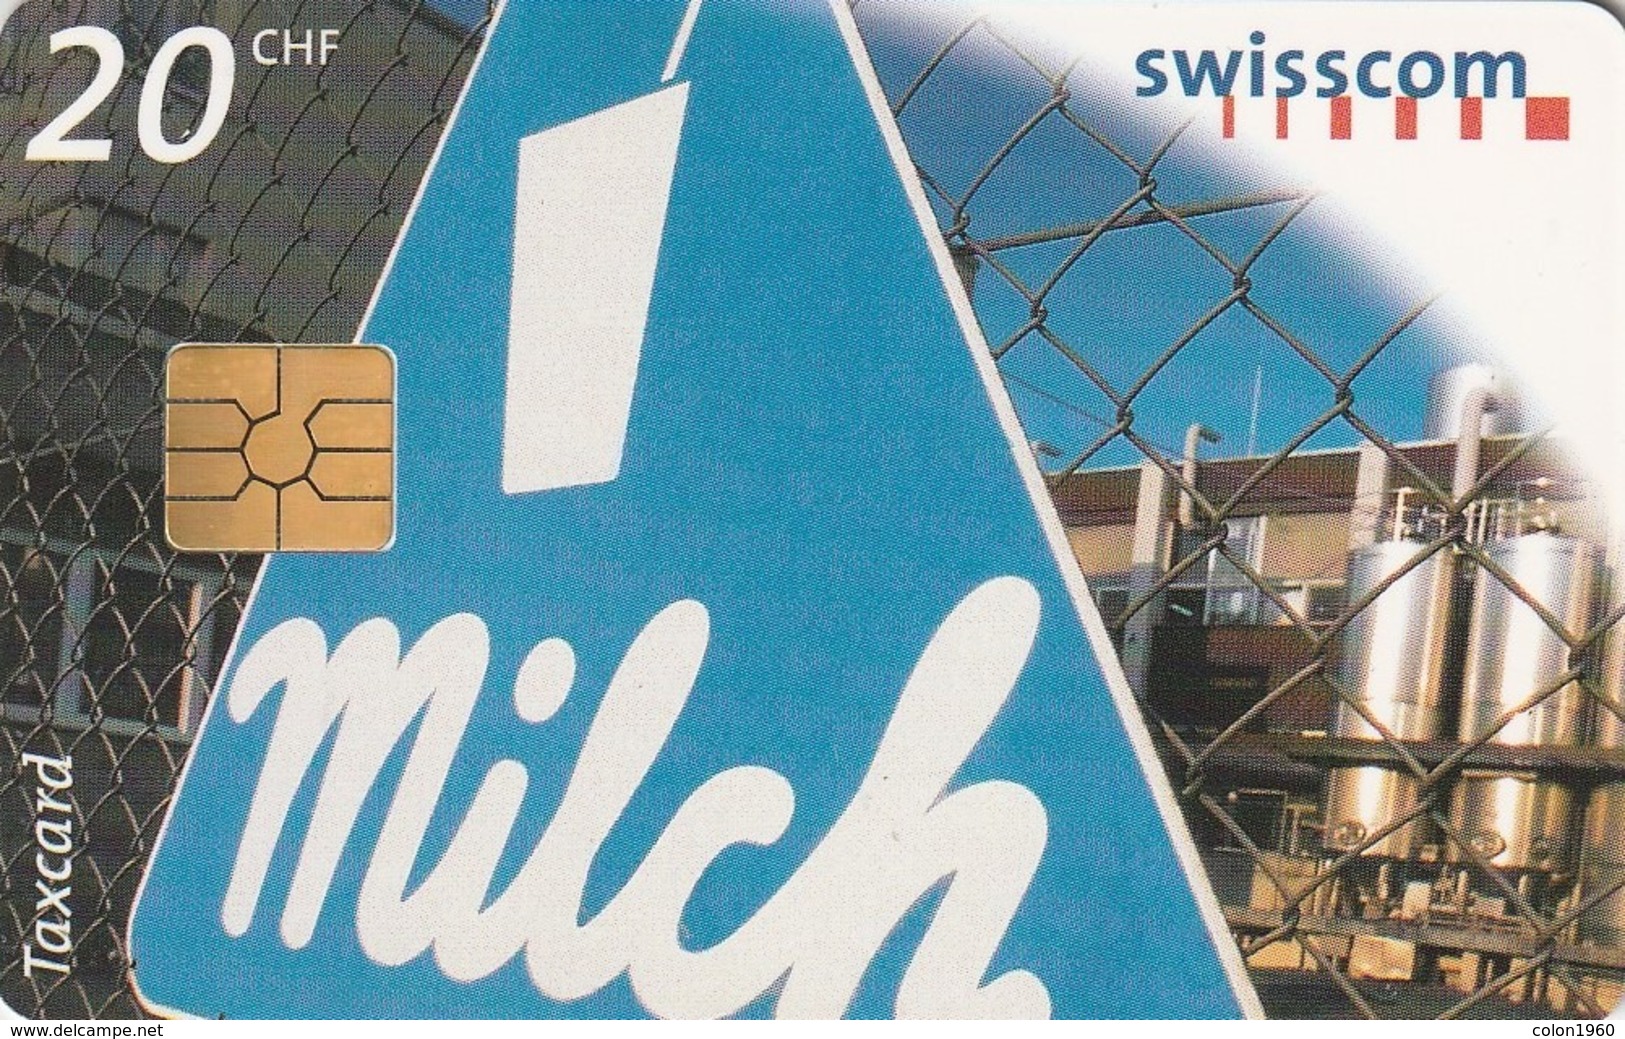 SUIZA. SUI-CP-33A. Swiss Milk. Power Station. 04/98. (211) - Suiza